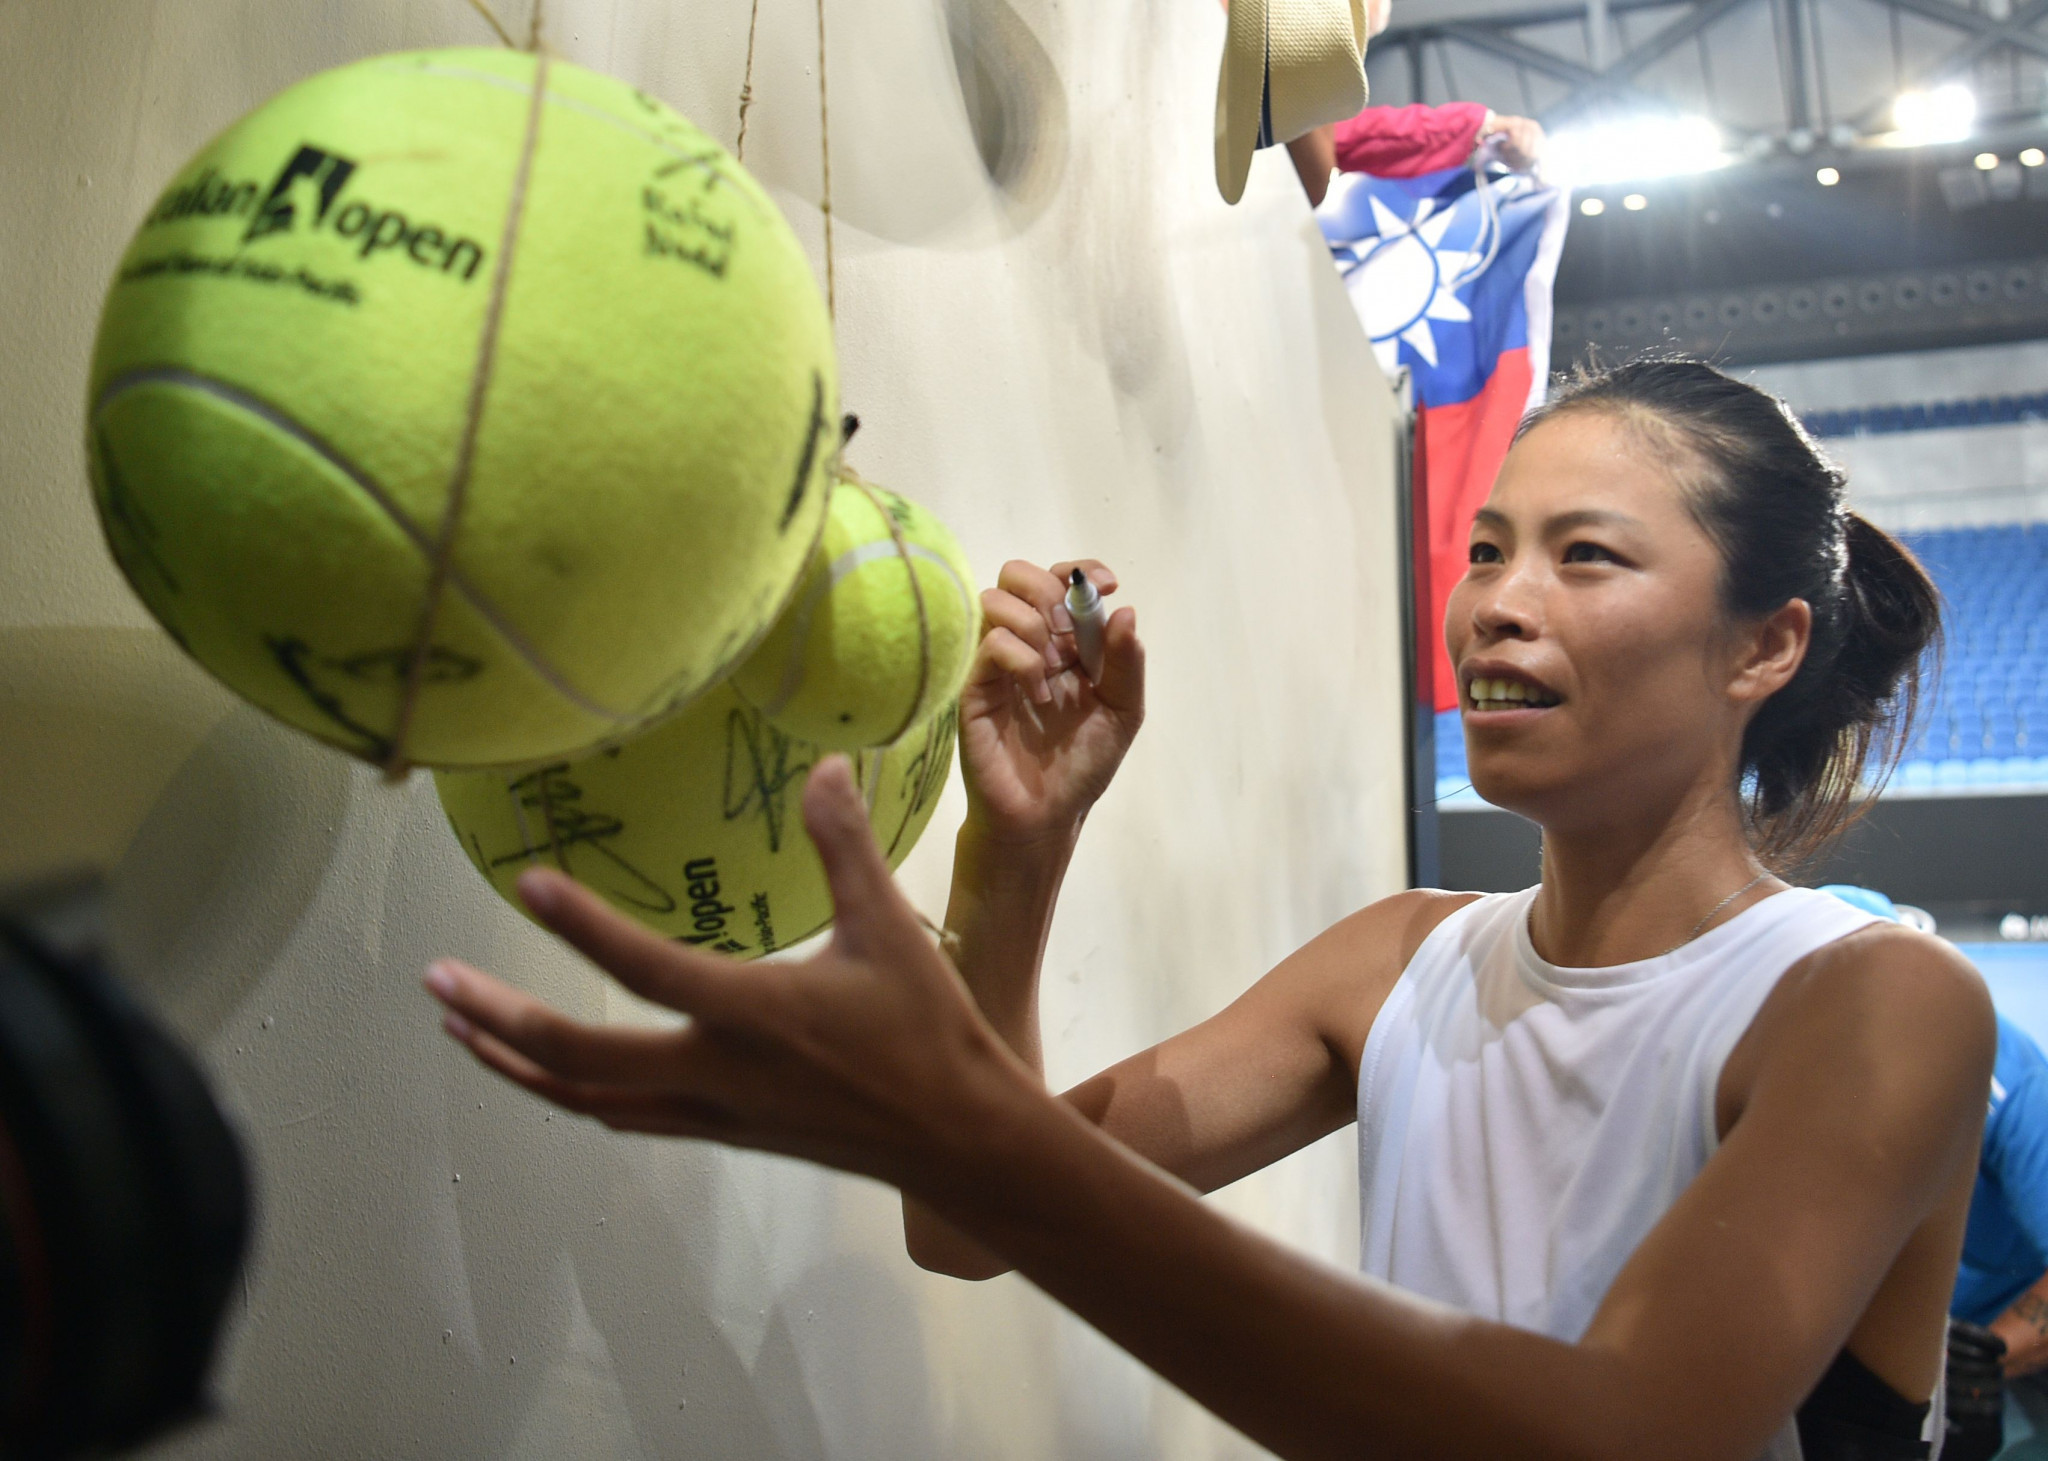 Taiwan's Hsieh Su-Wei signs a giant tennis ball after winning today ©Getty Images